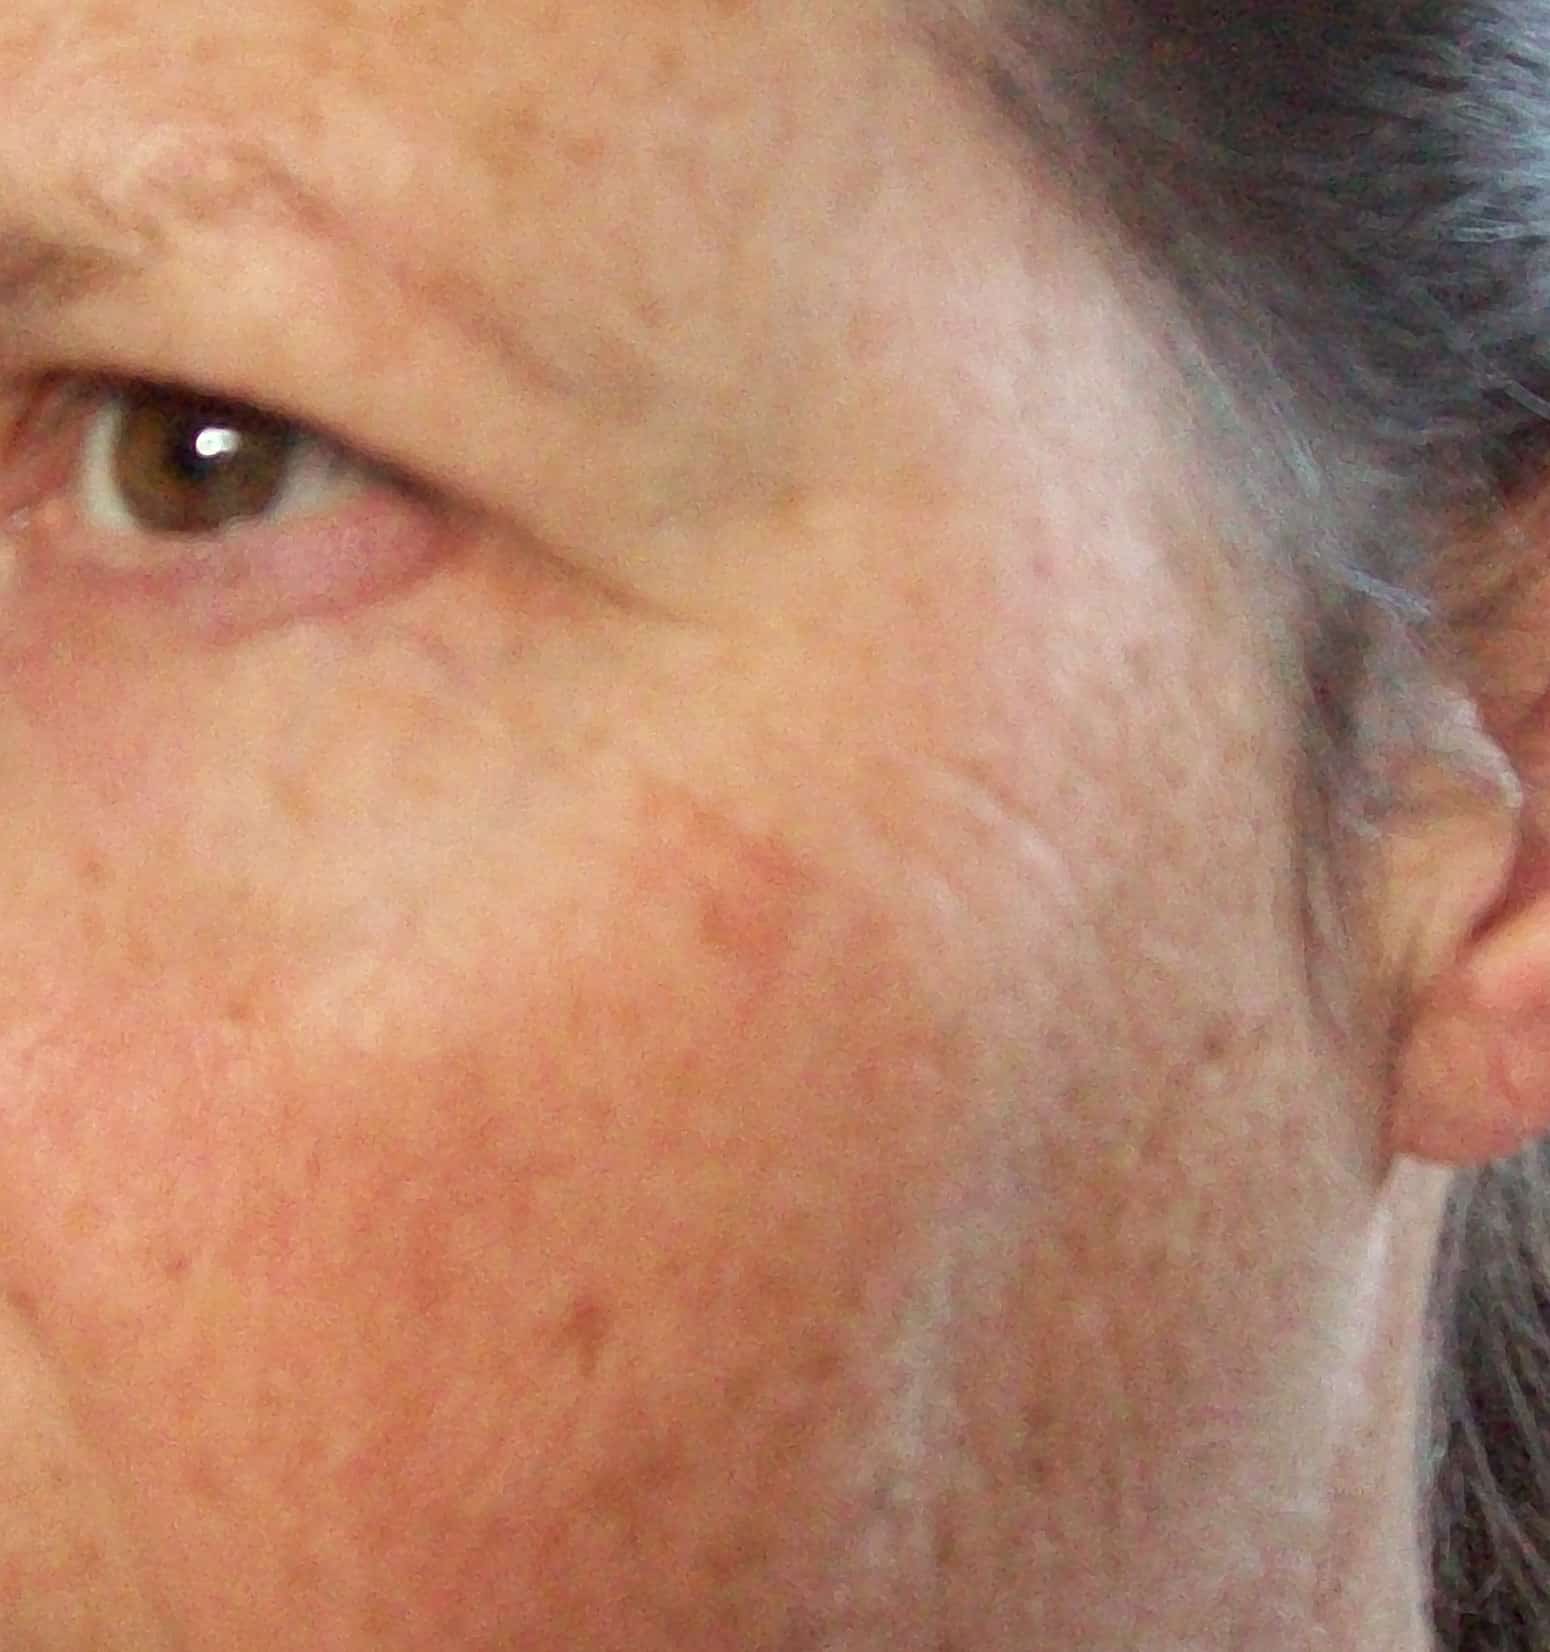 shingles on face images